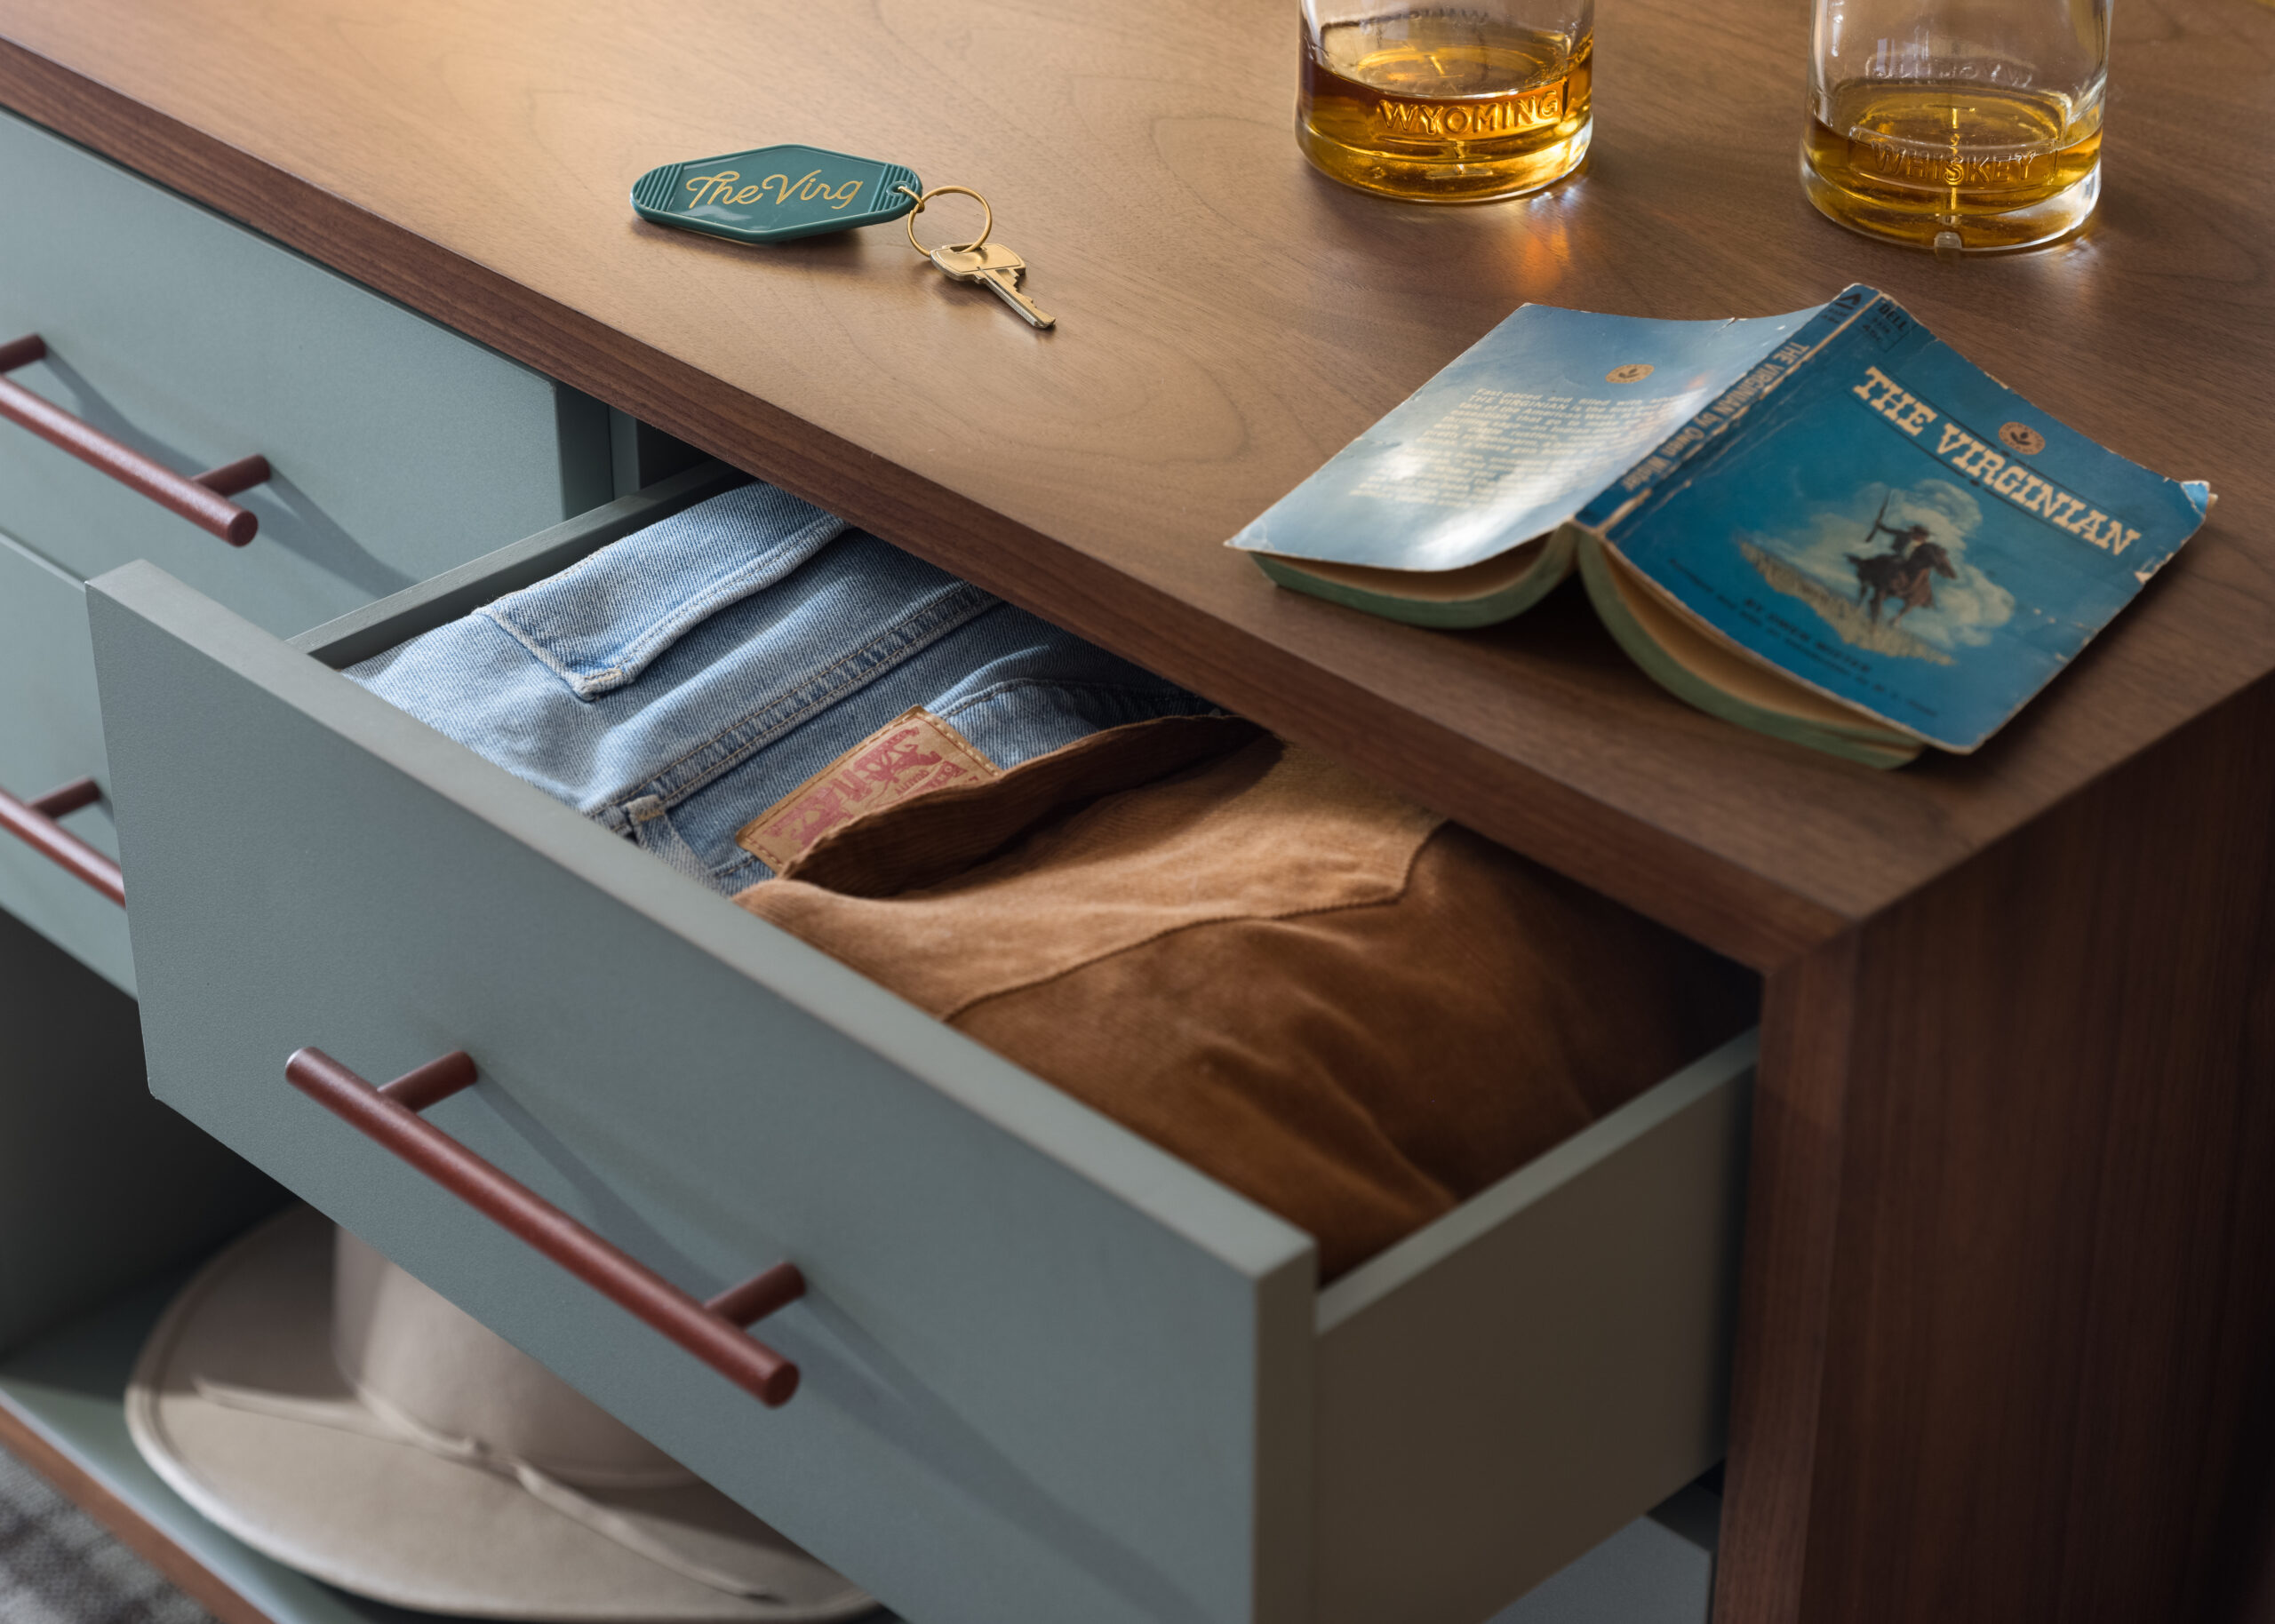 Clothes neatly stored in the drawer, a key, notebook, and two glasses of alcohol on the table.